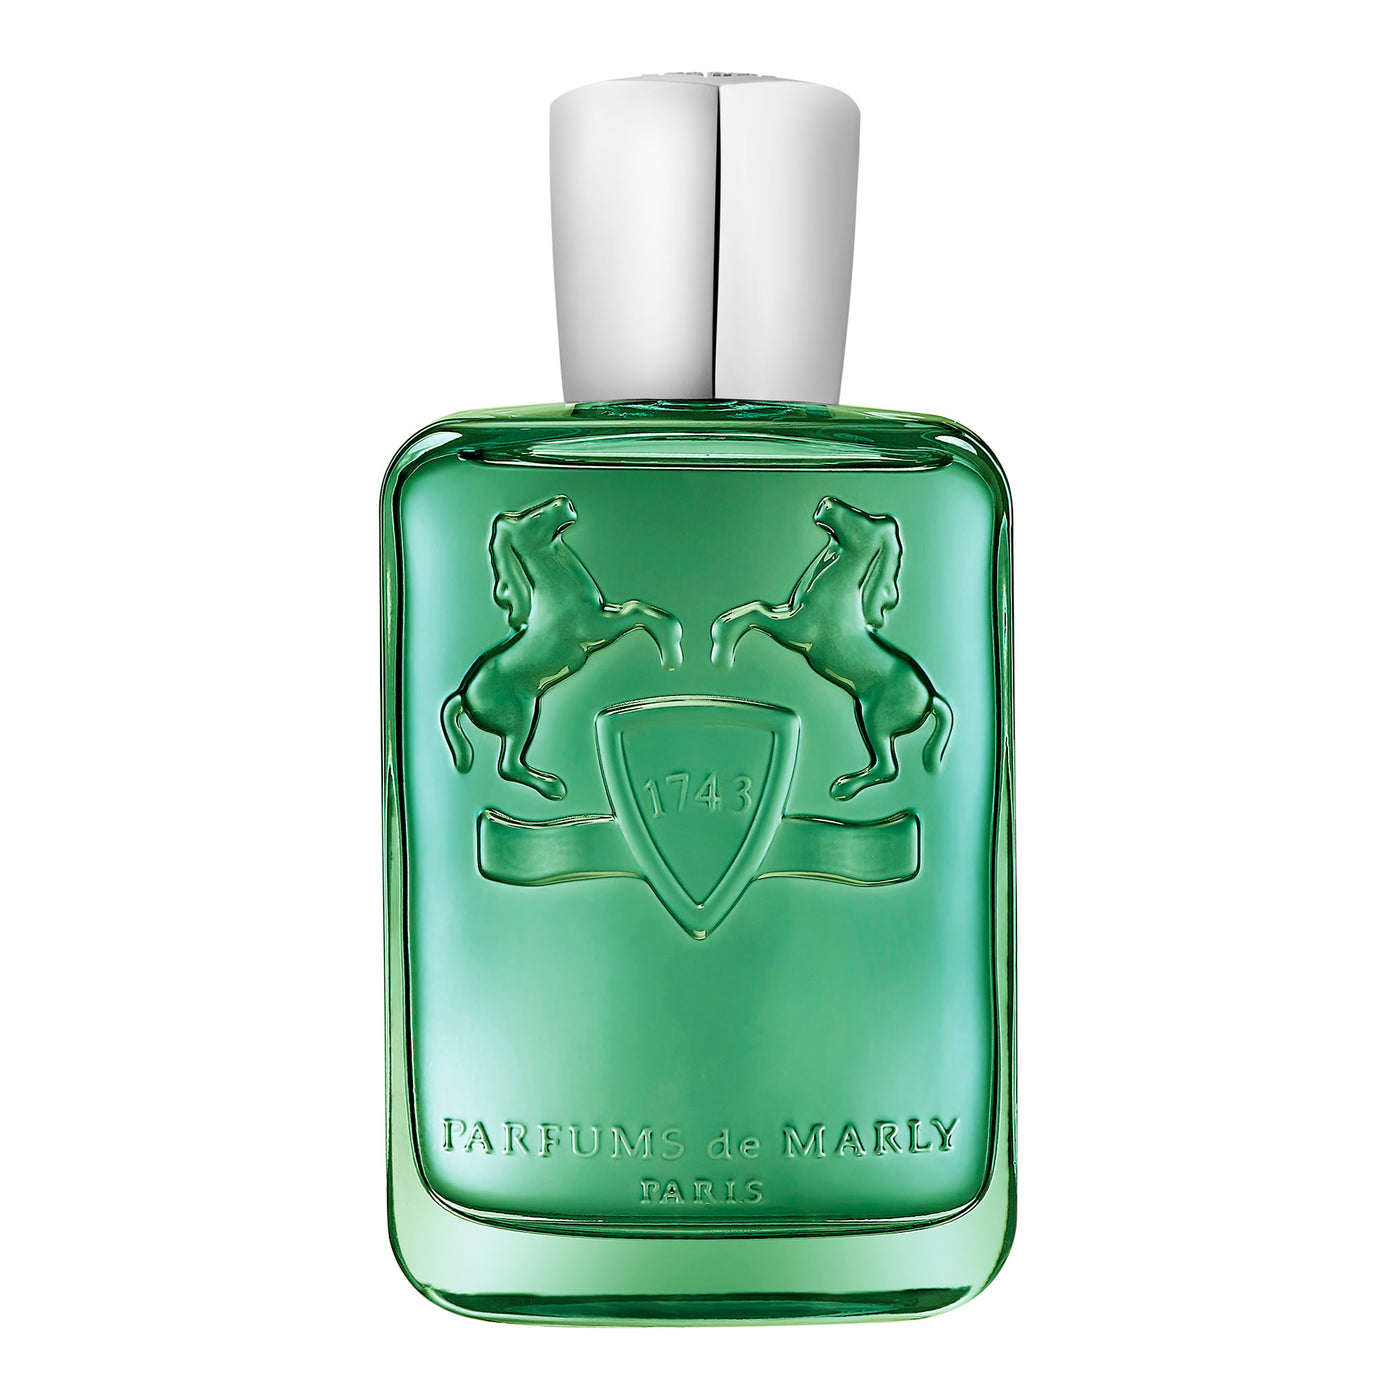 Parfums de Marly Greenley - 125ml - Gharyal by Collectibles 